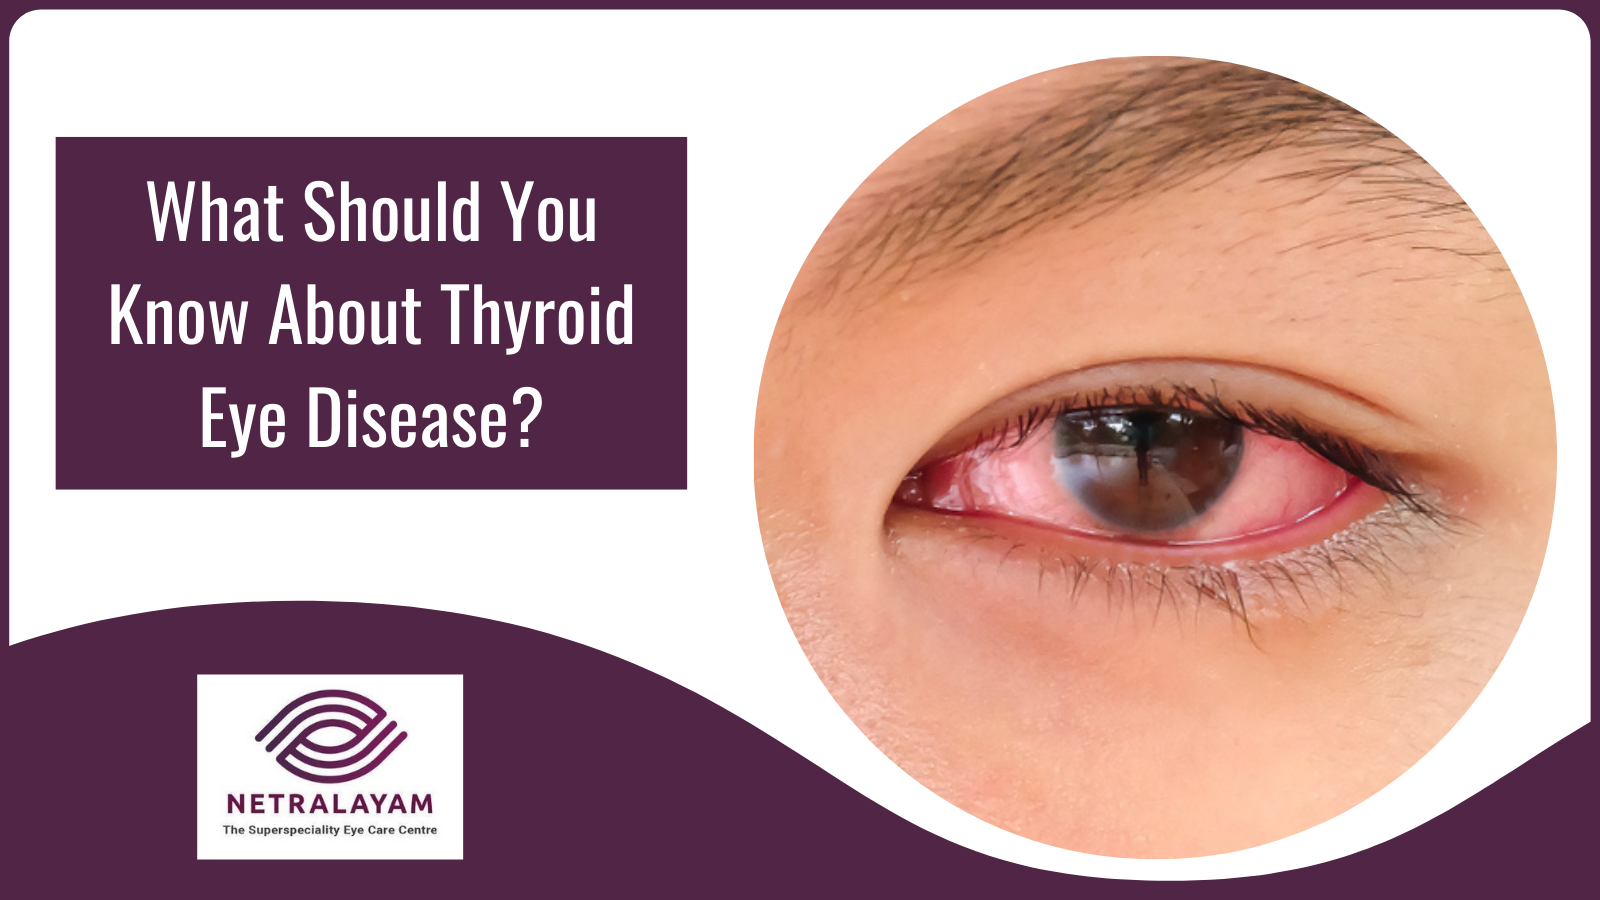 What Should You Know About Thyroid Eye Disease?